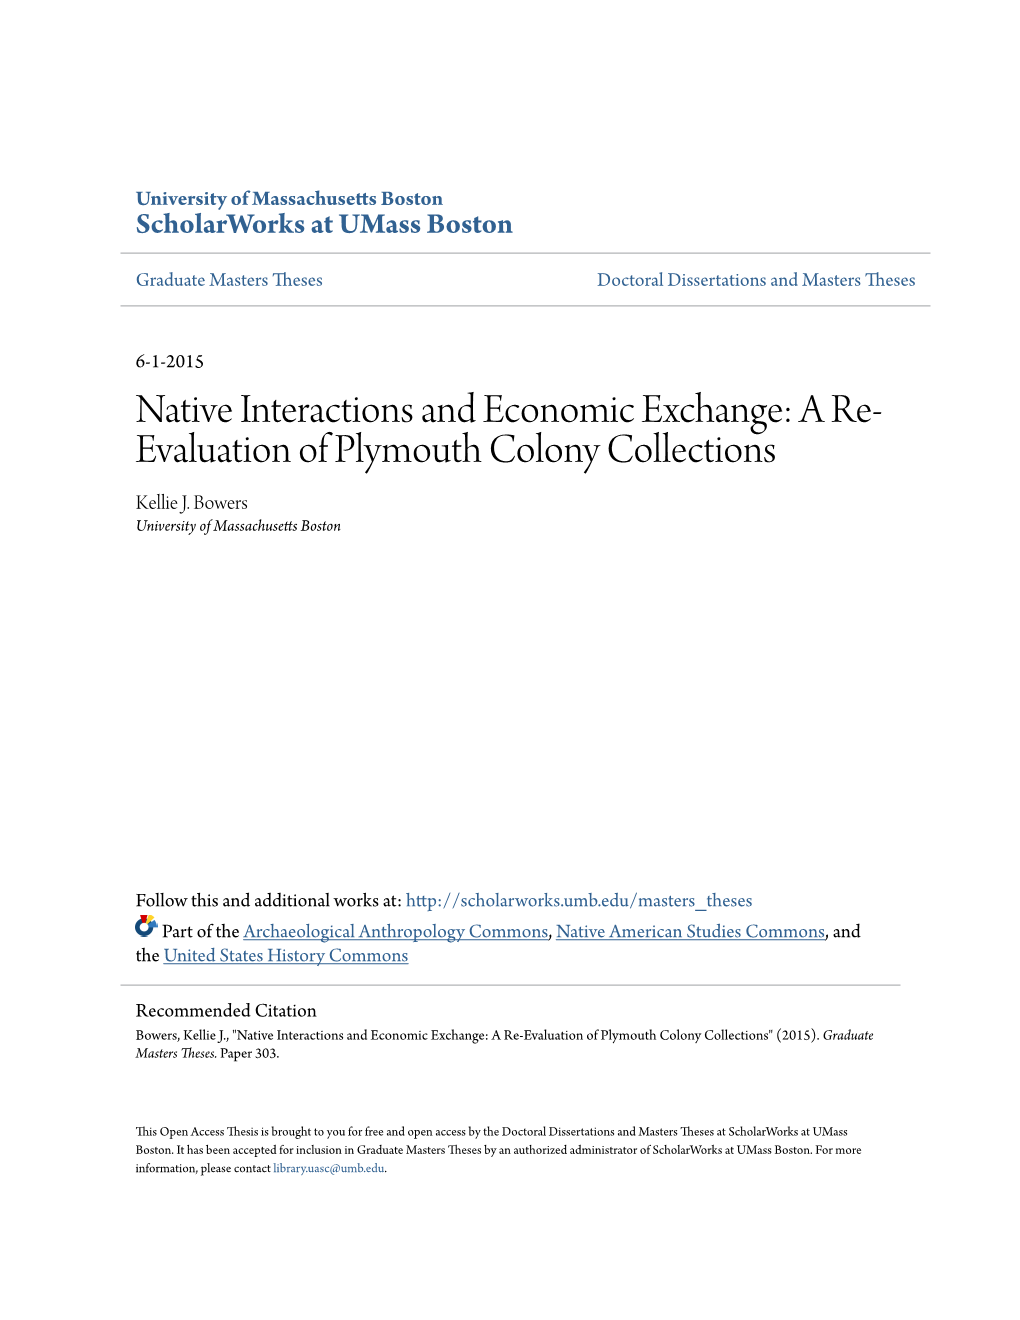 A Re-Evaluation of Plymouth Colony Collections" (2015)